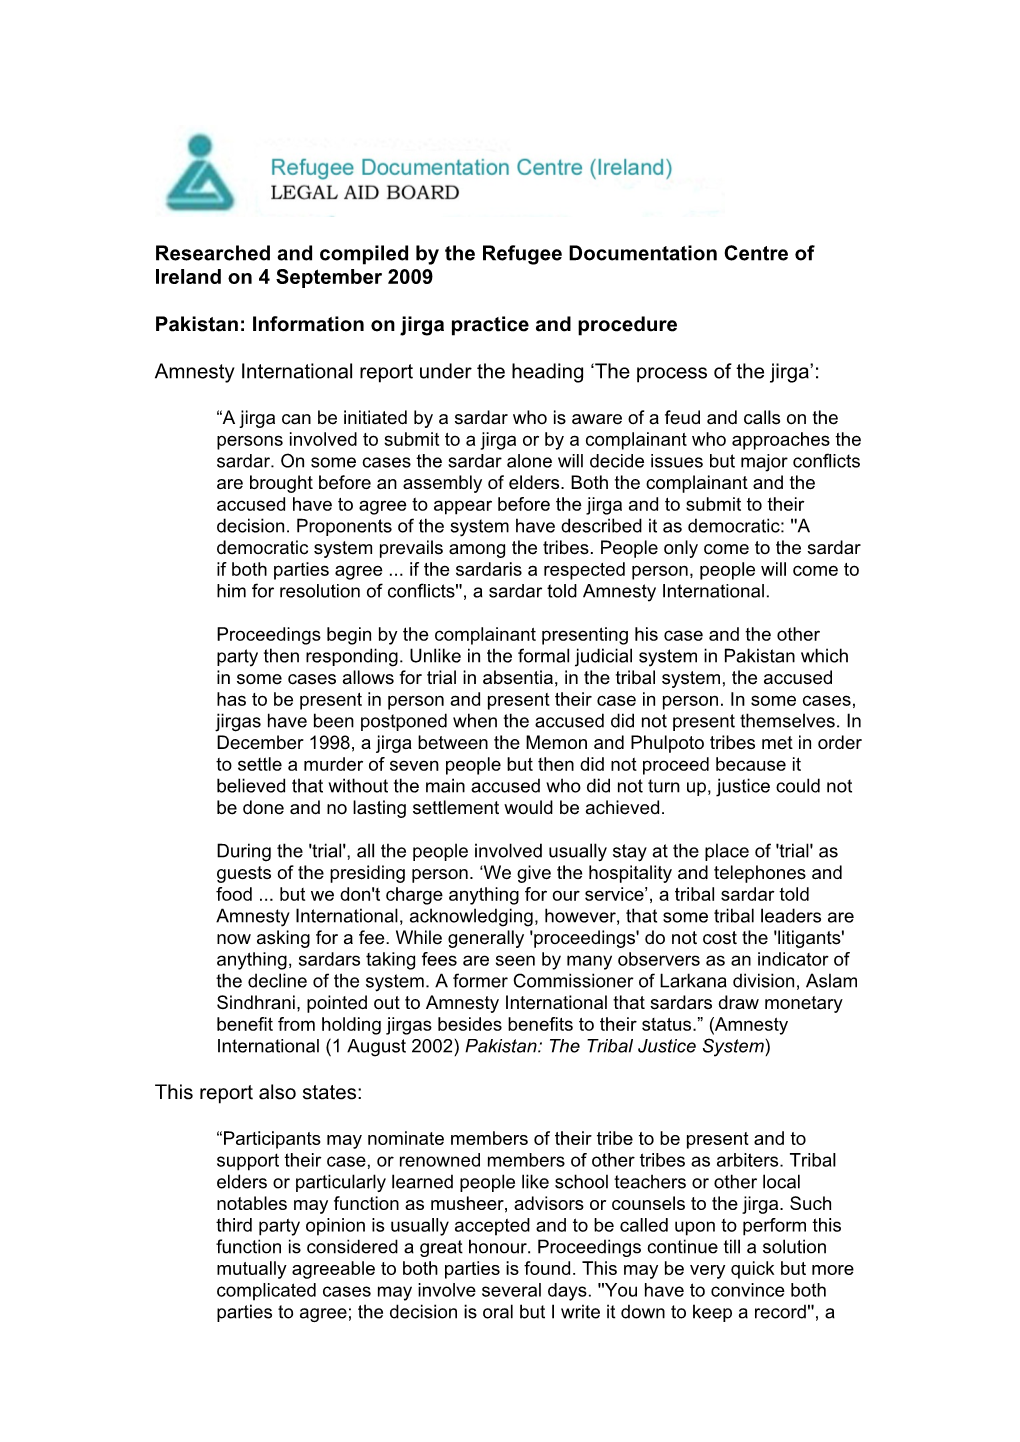 Researched and Compiled by the Refugee Documentation Centre of Ireland on 4 September 2009 Pakistan: Information on Jirga Pract